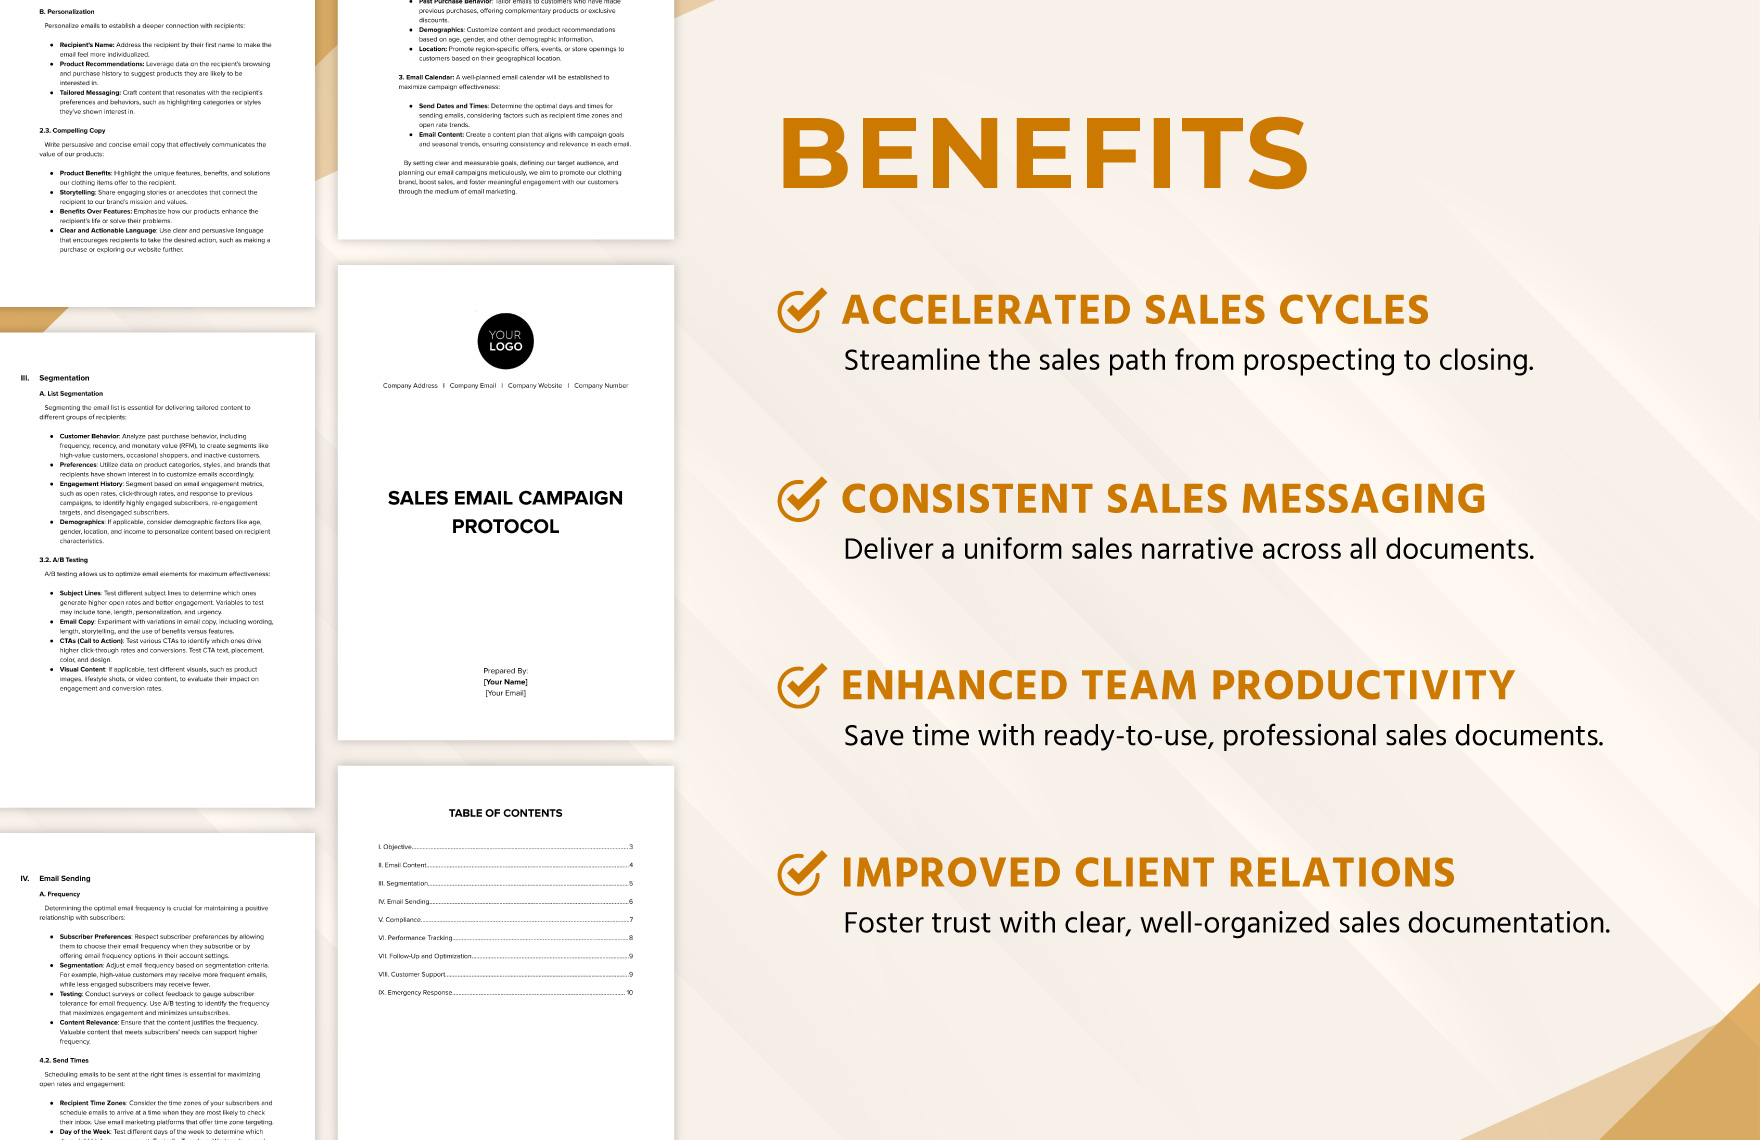 Sales Email Campaign Protocol Template